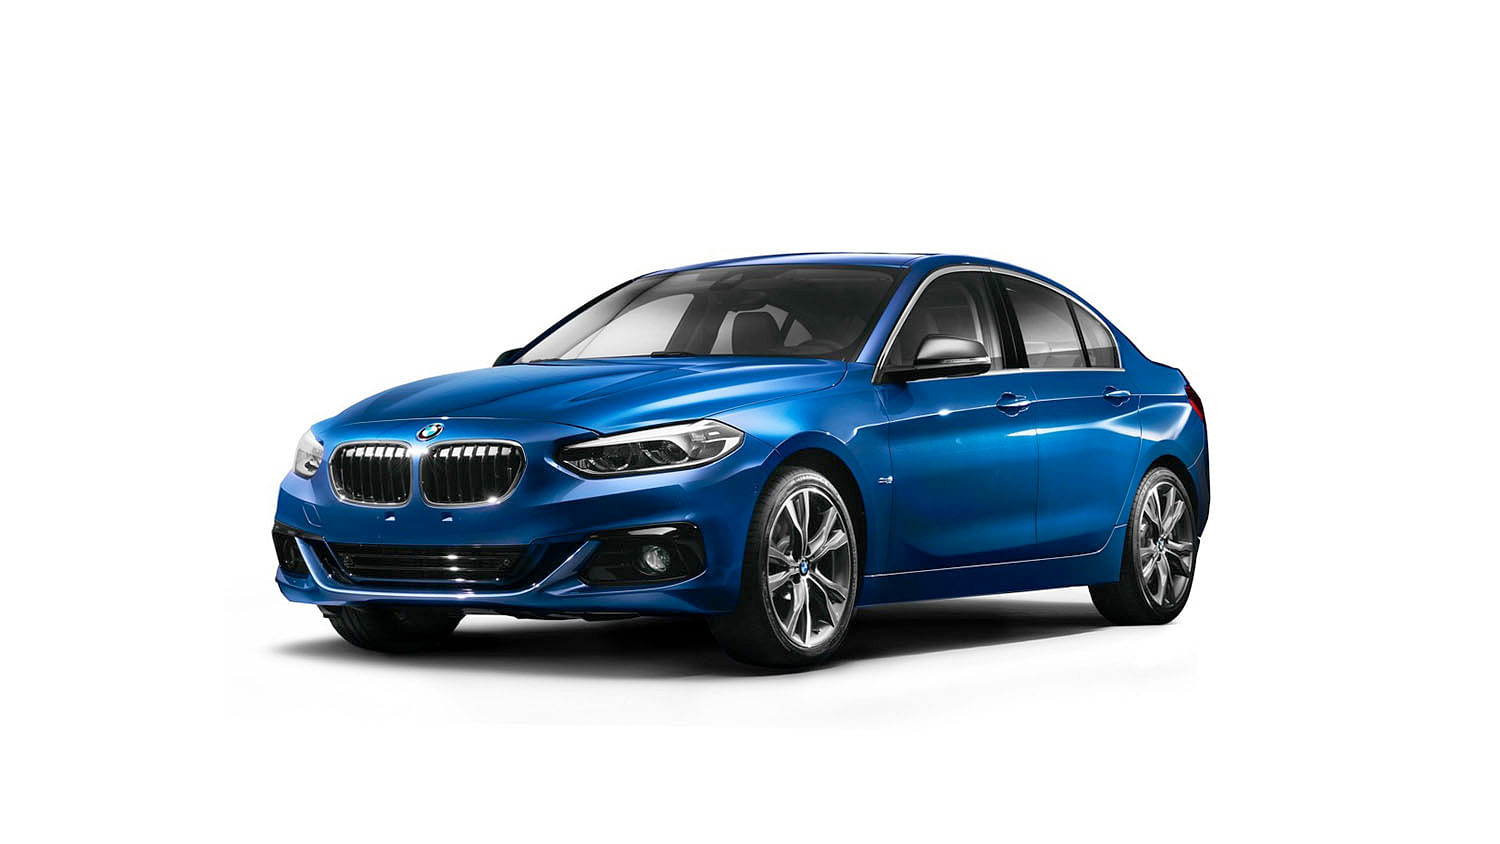 BMW 1 Series is a Sedan but not for everyone. (Photo Courtesy: BMW Brilliance)